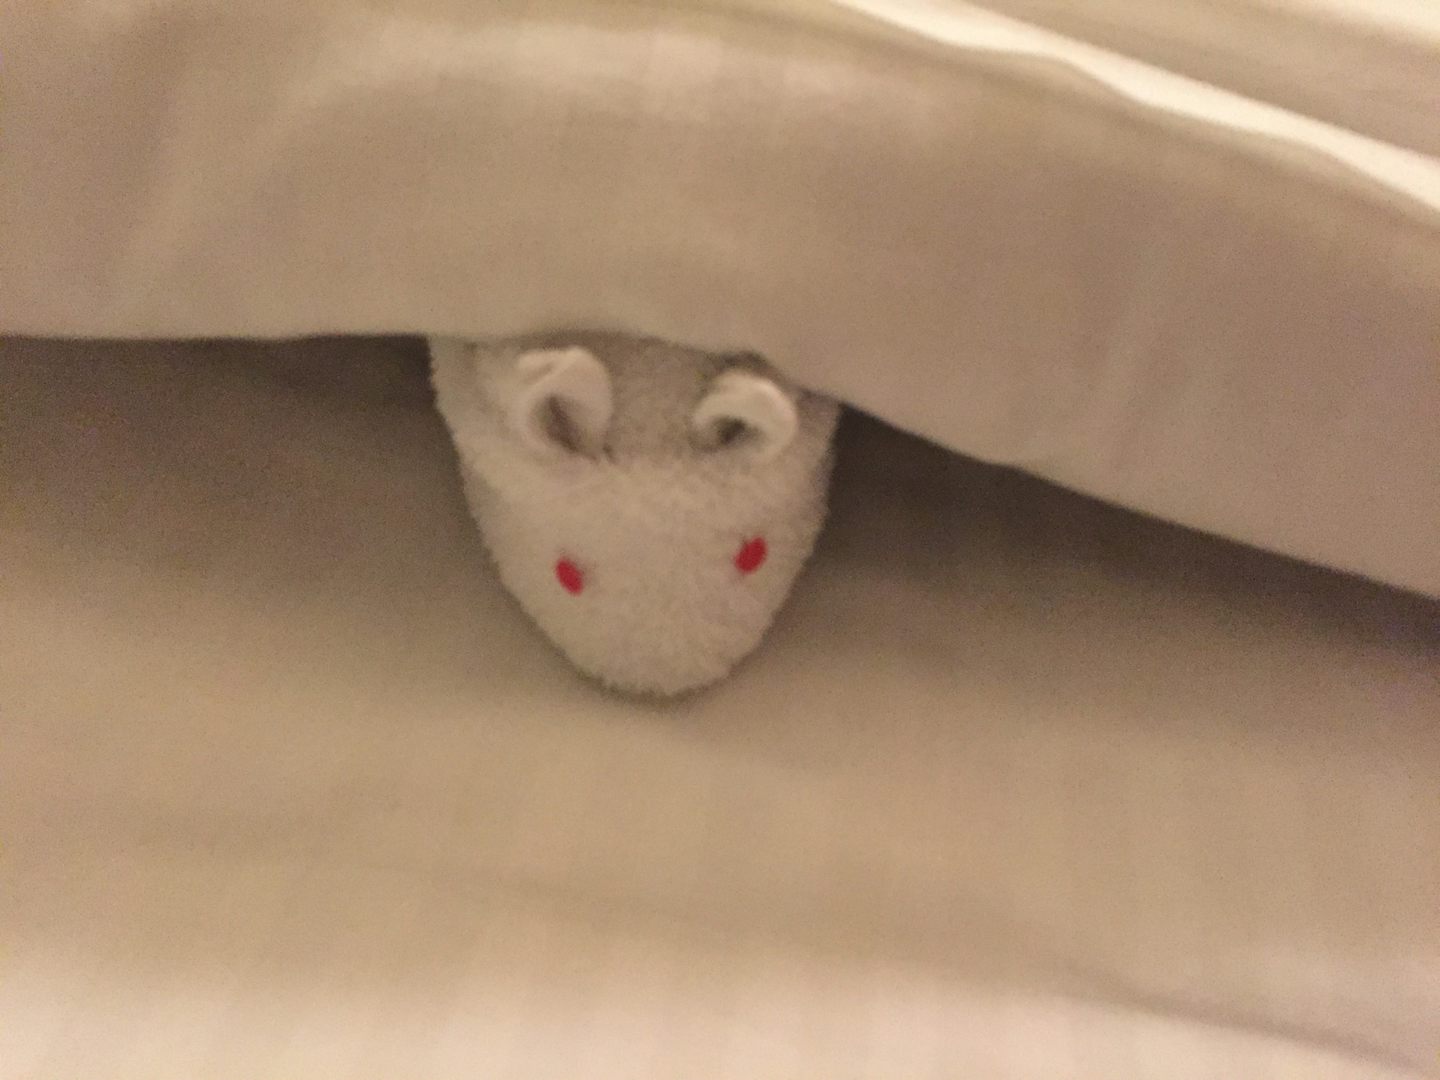 There was a towel animal every night (unlike some cruise lines which are no